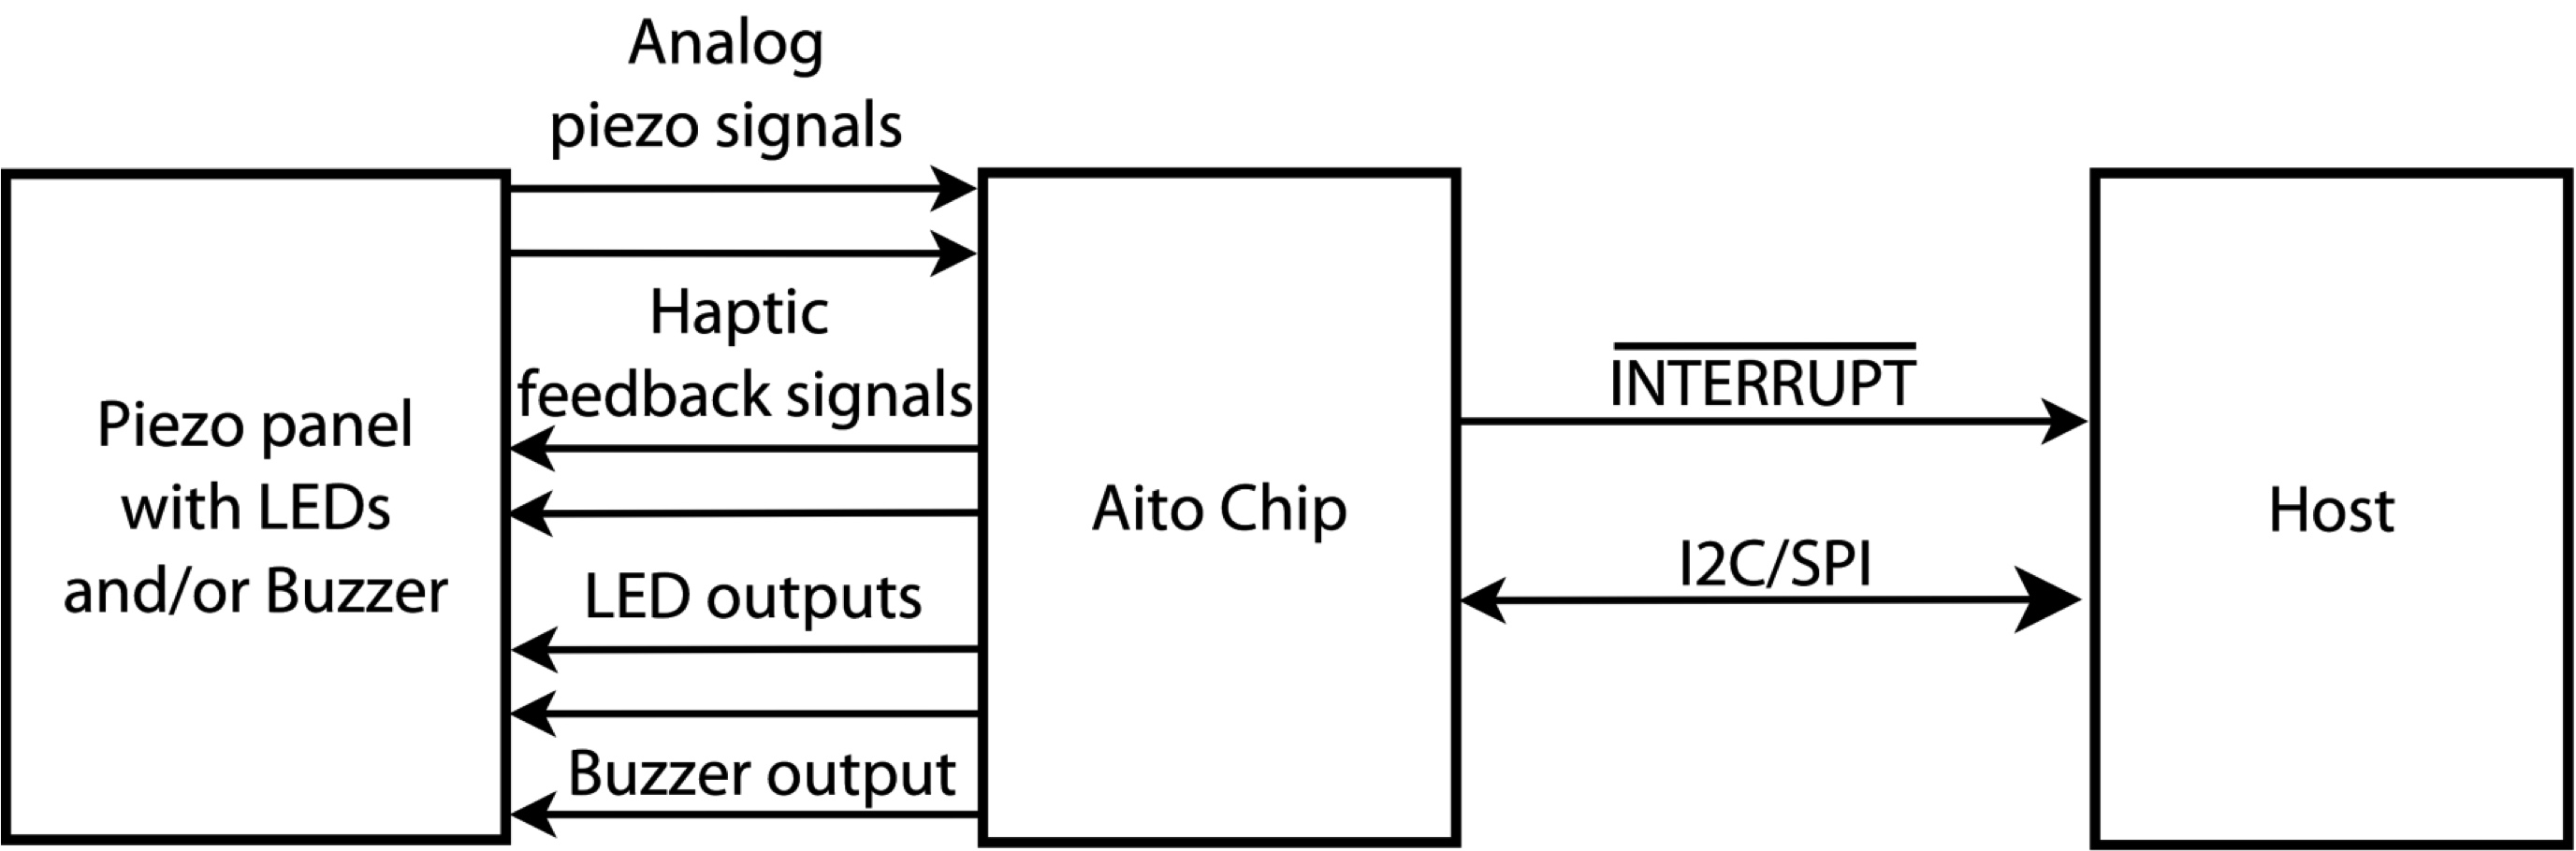 Figure 2: The Aito Chip provides a complete interface between a piezo touch switch panel, with its indicators and other feedback devices, and the host system.